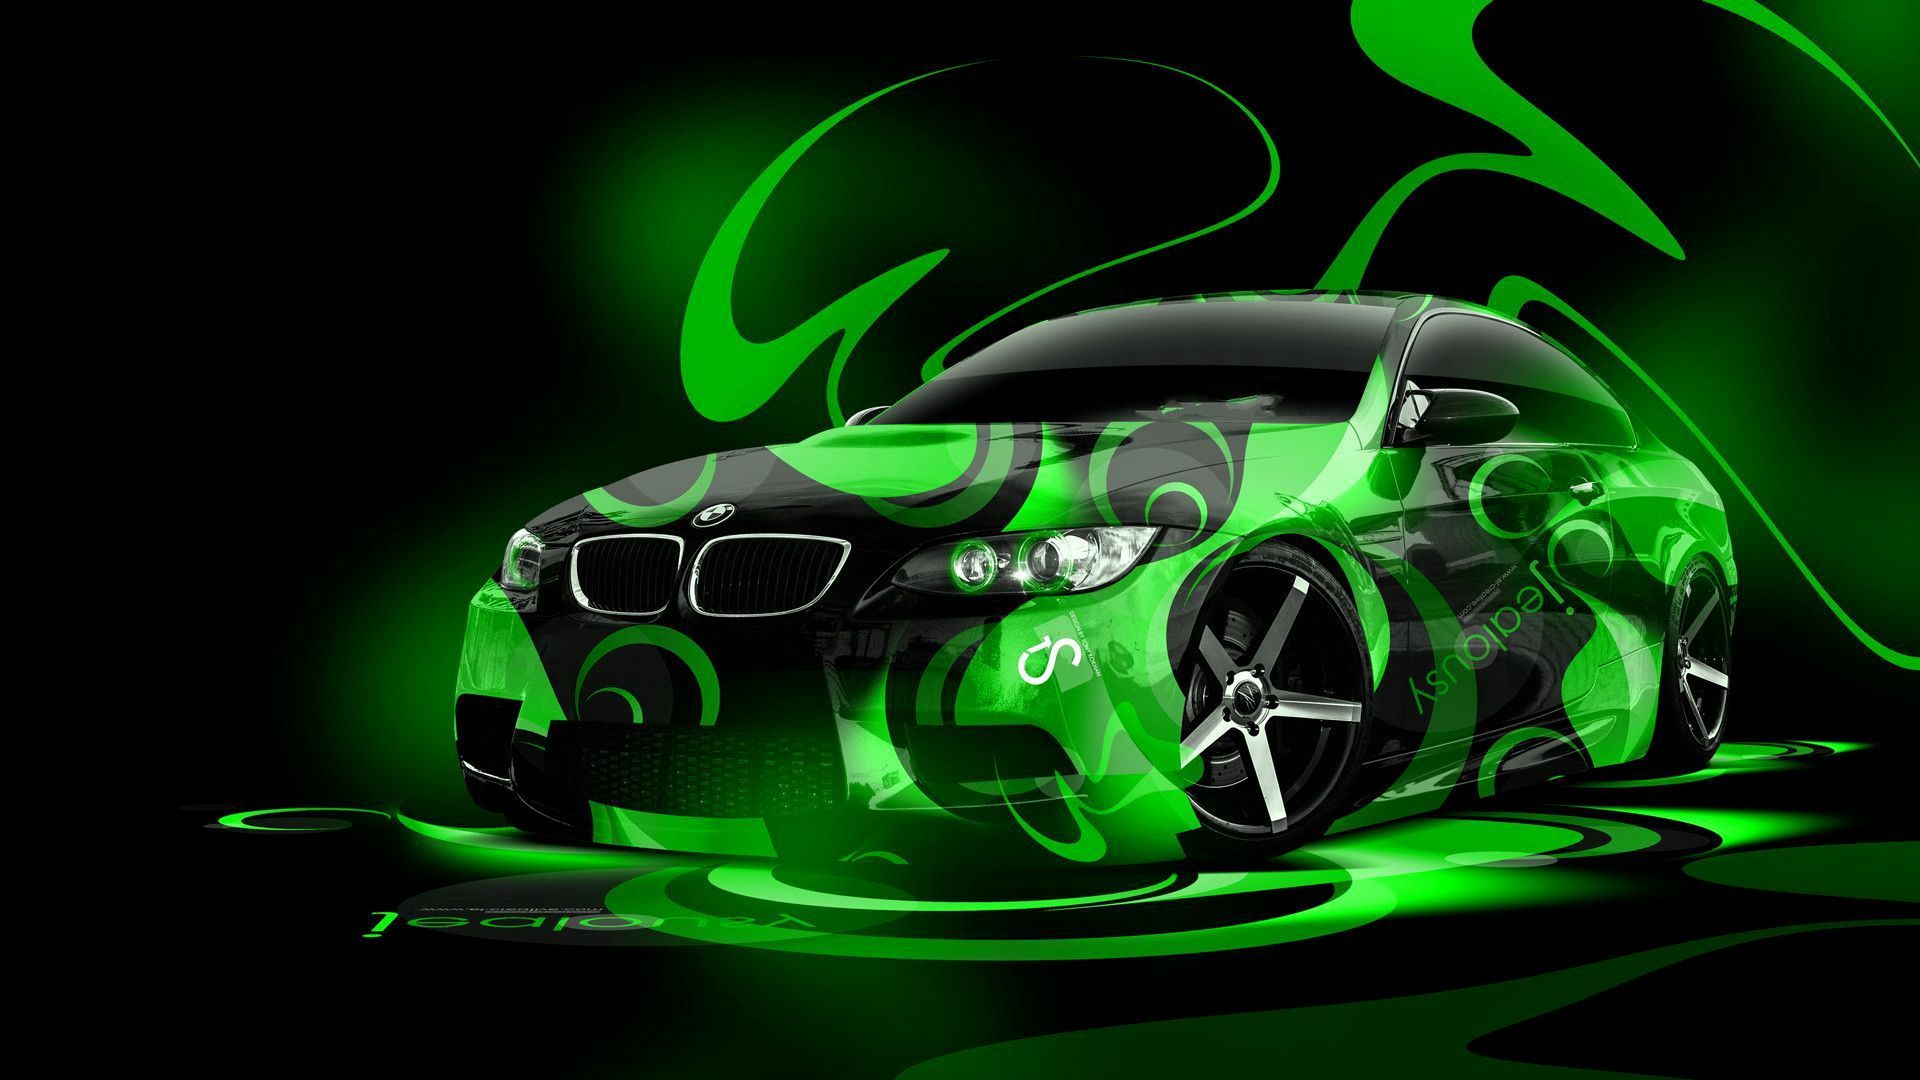 Lime green super sports car with red spoiler Stock Illustration by  ©Trimitrius #157555230